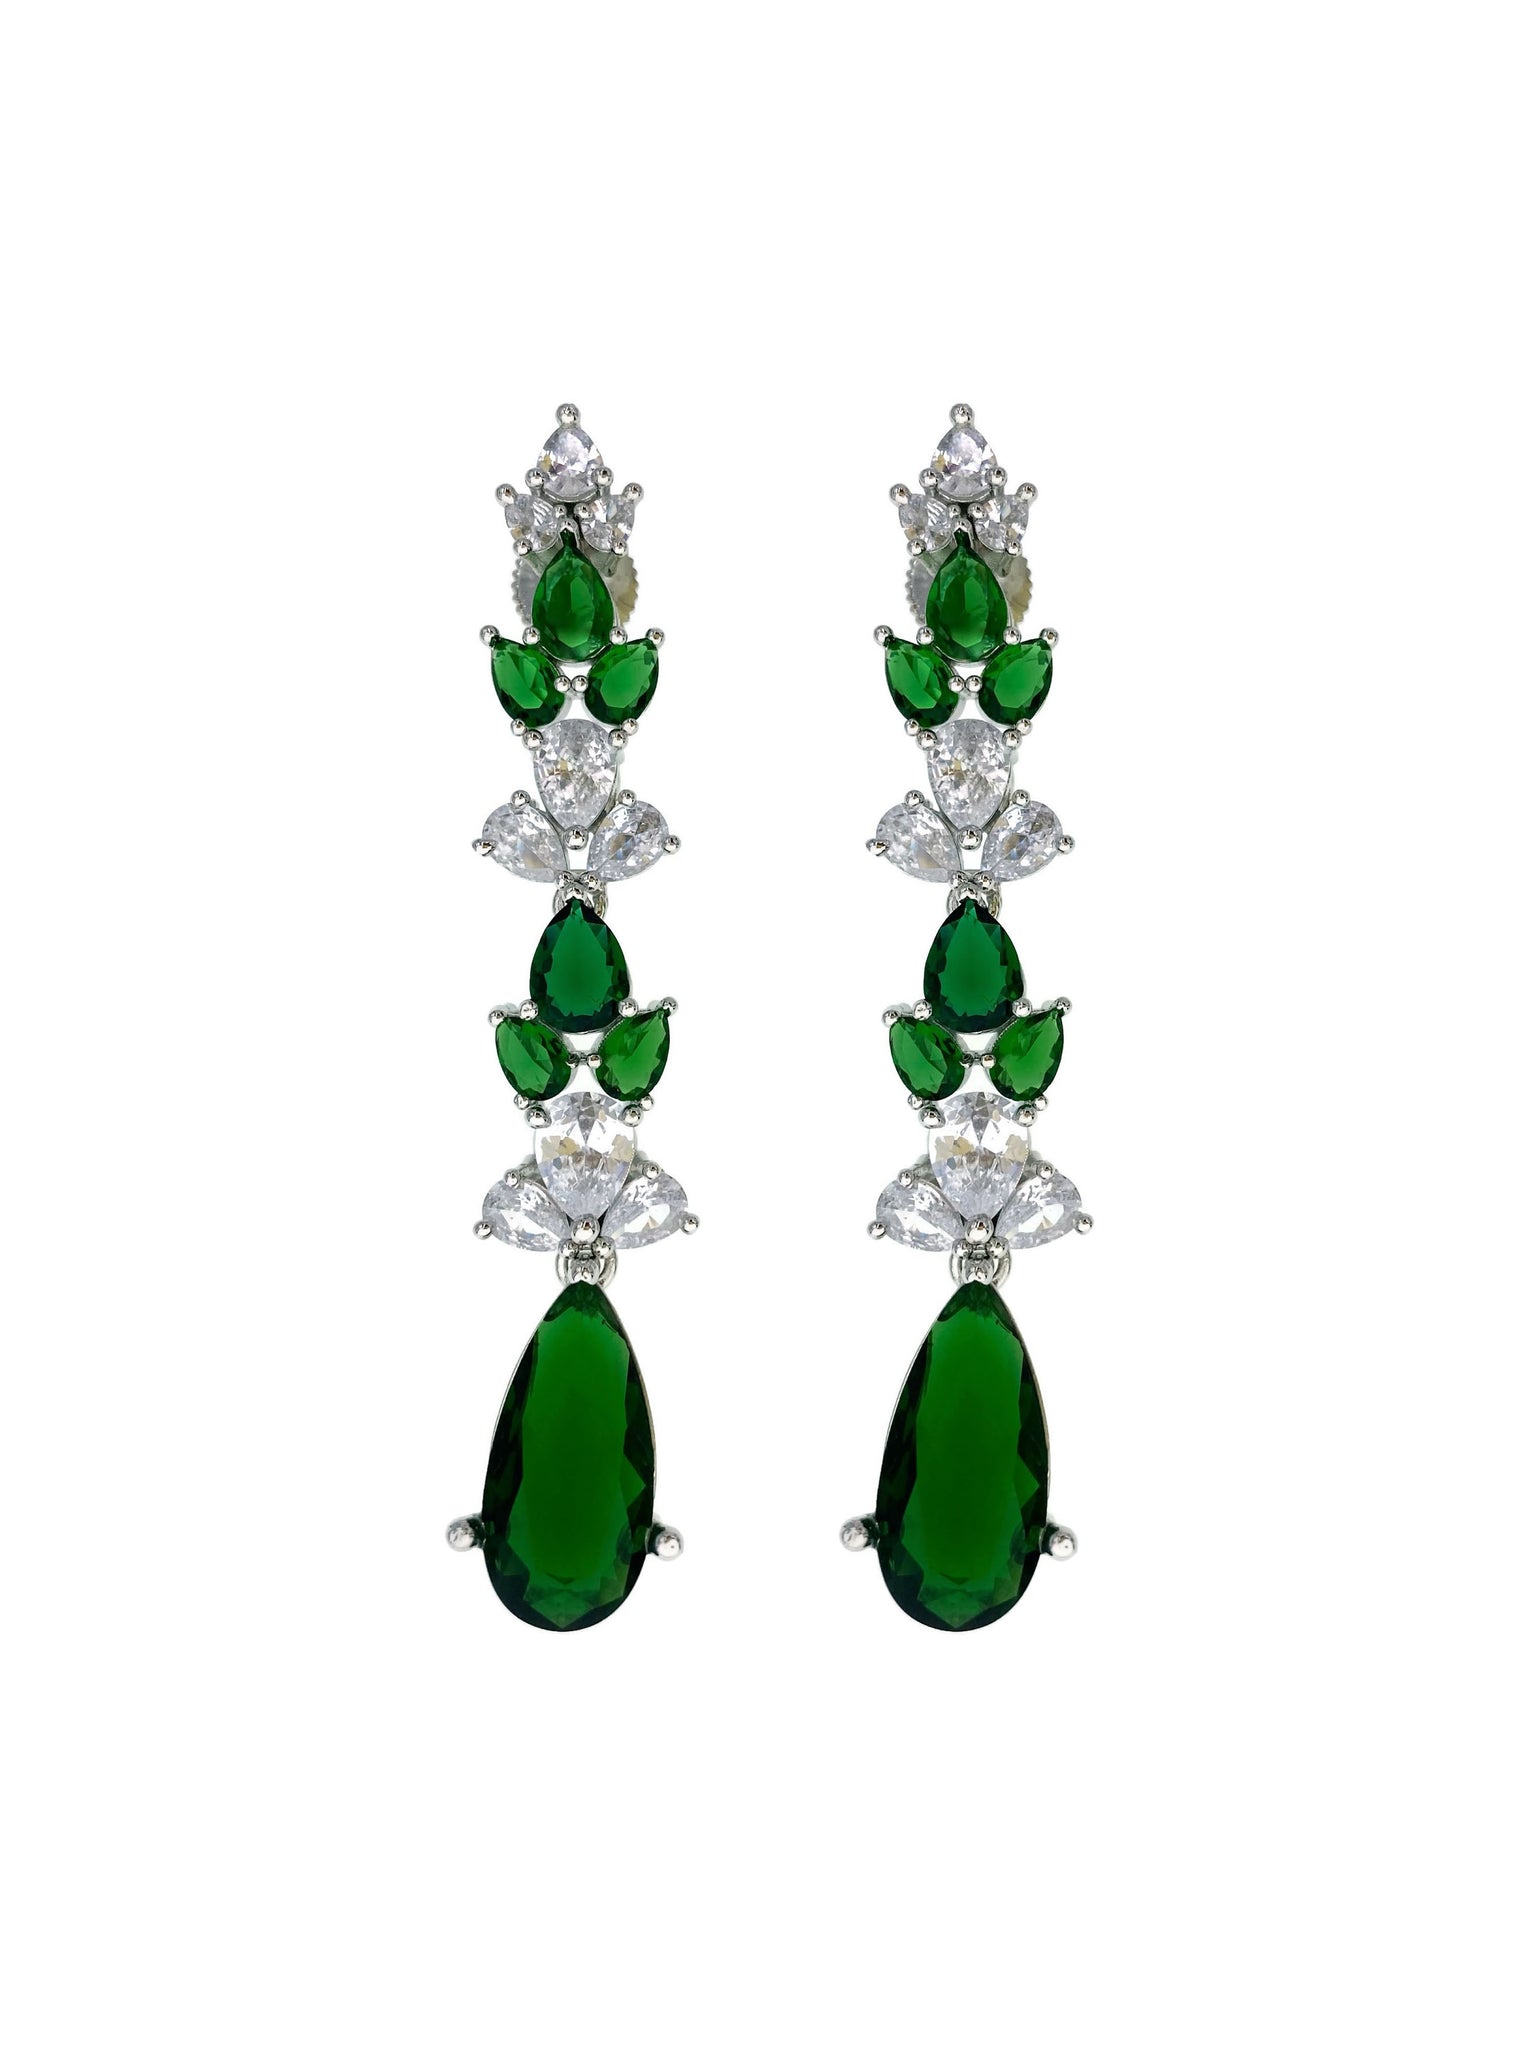 Emerald Diamondesque Cascading Jewels Earrings close up